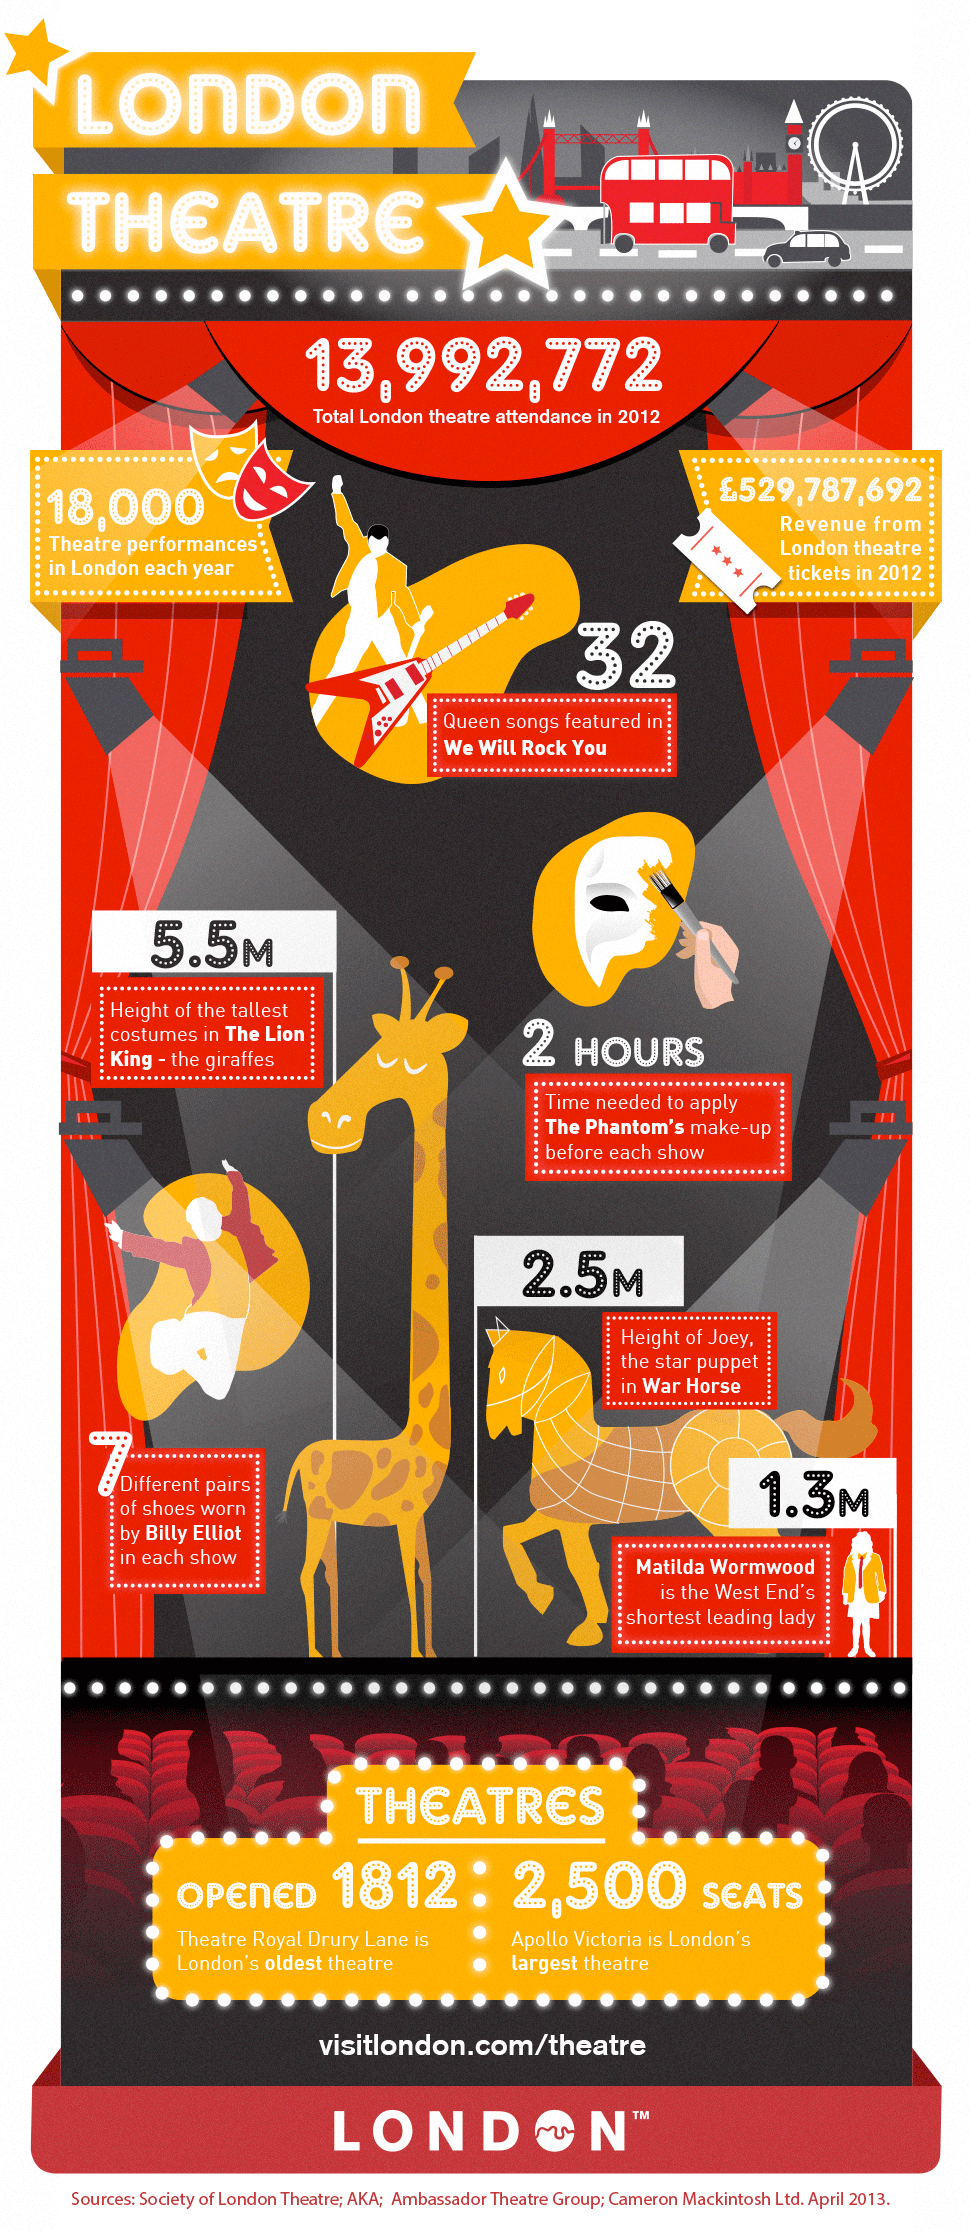 London Theatre facts and figures